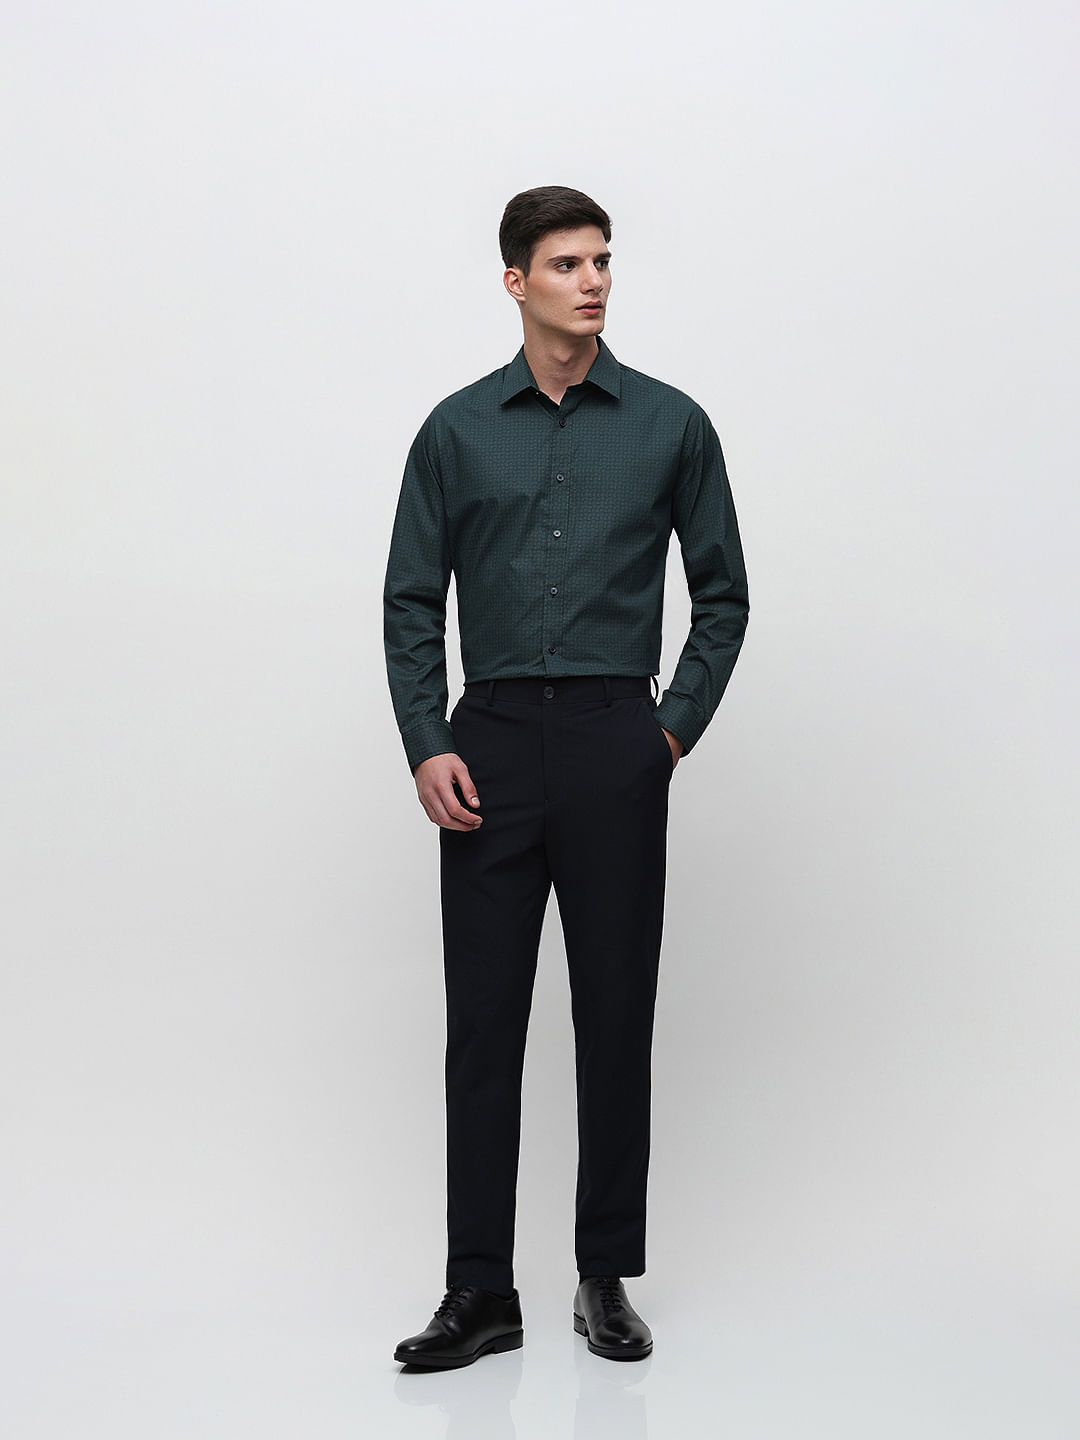 Does green shirt go with black? - Quora